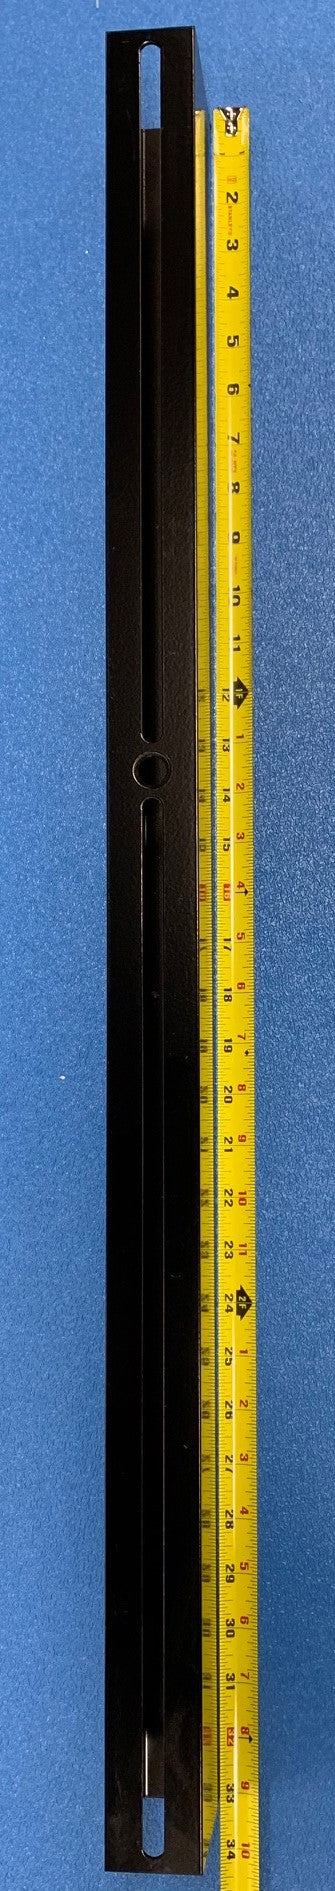 PLAYER TRACK (33") [SK1009-P800] for ICE game(s)